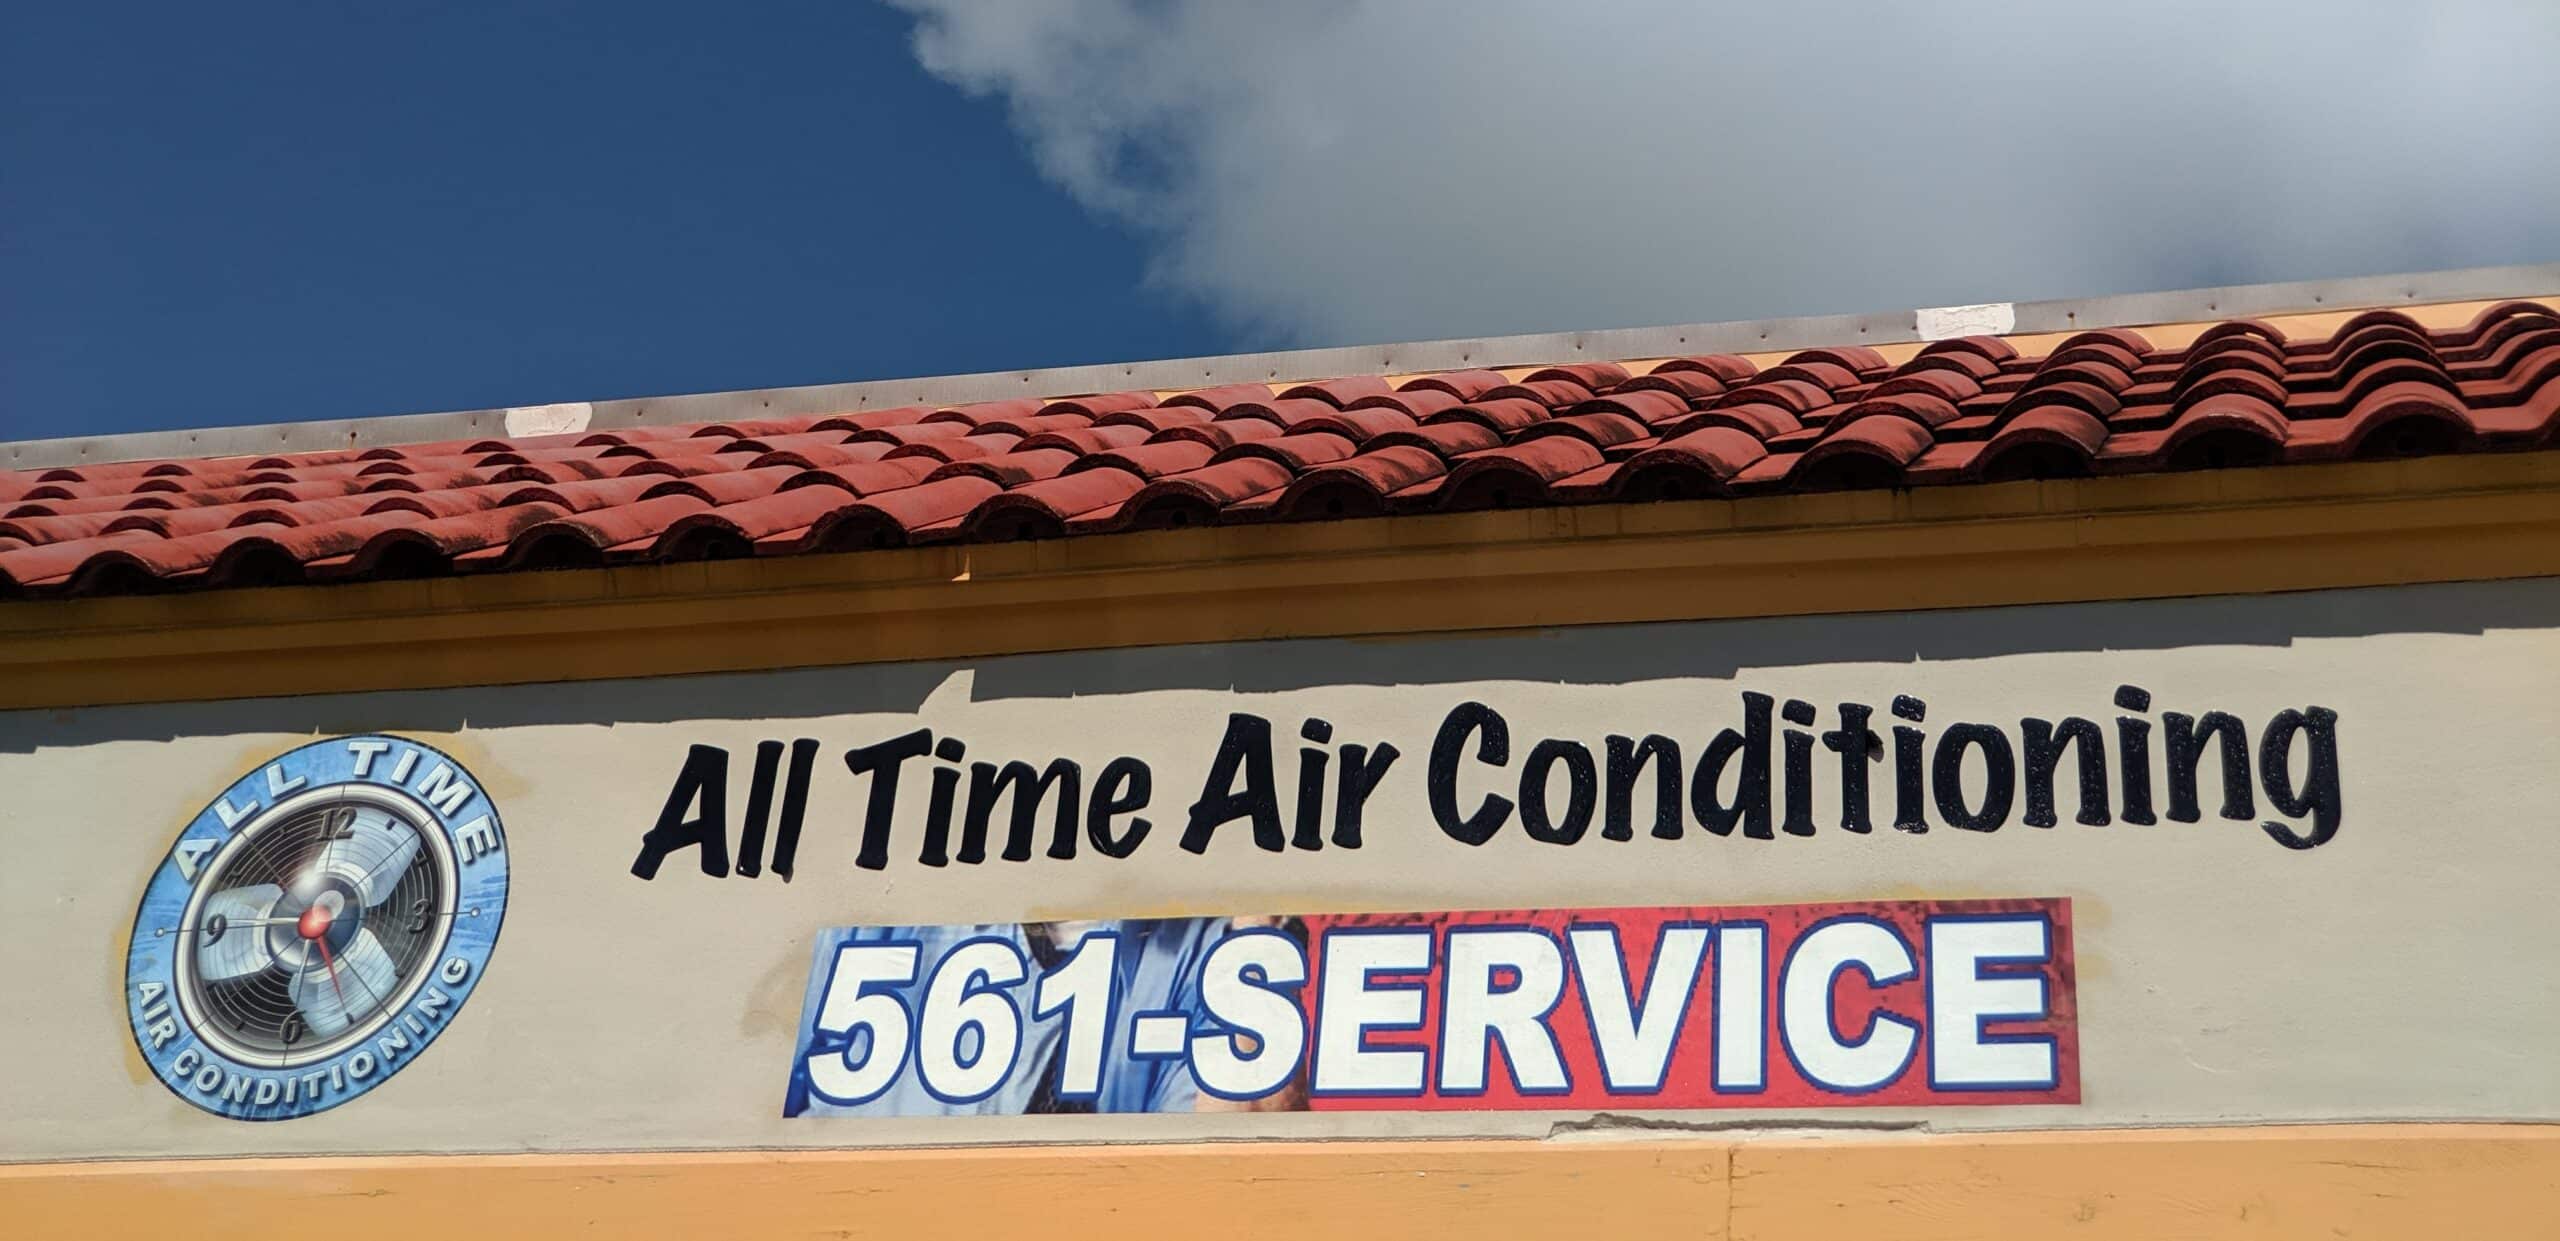 All Time Air Conditioning services Jupiter, Florida and the surrounding area